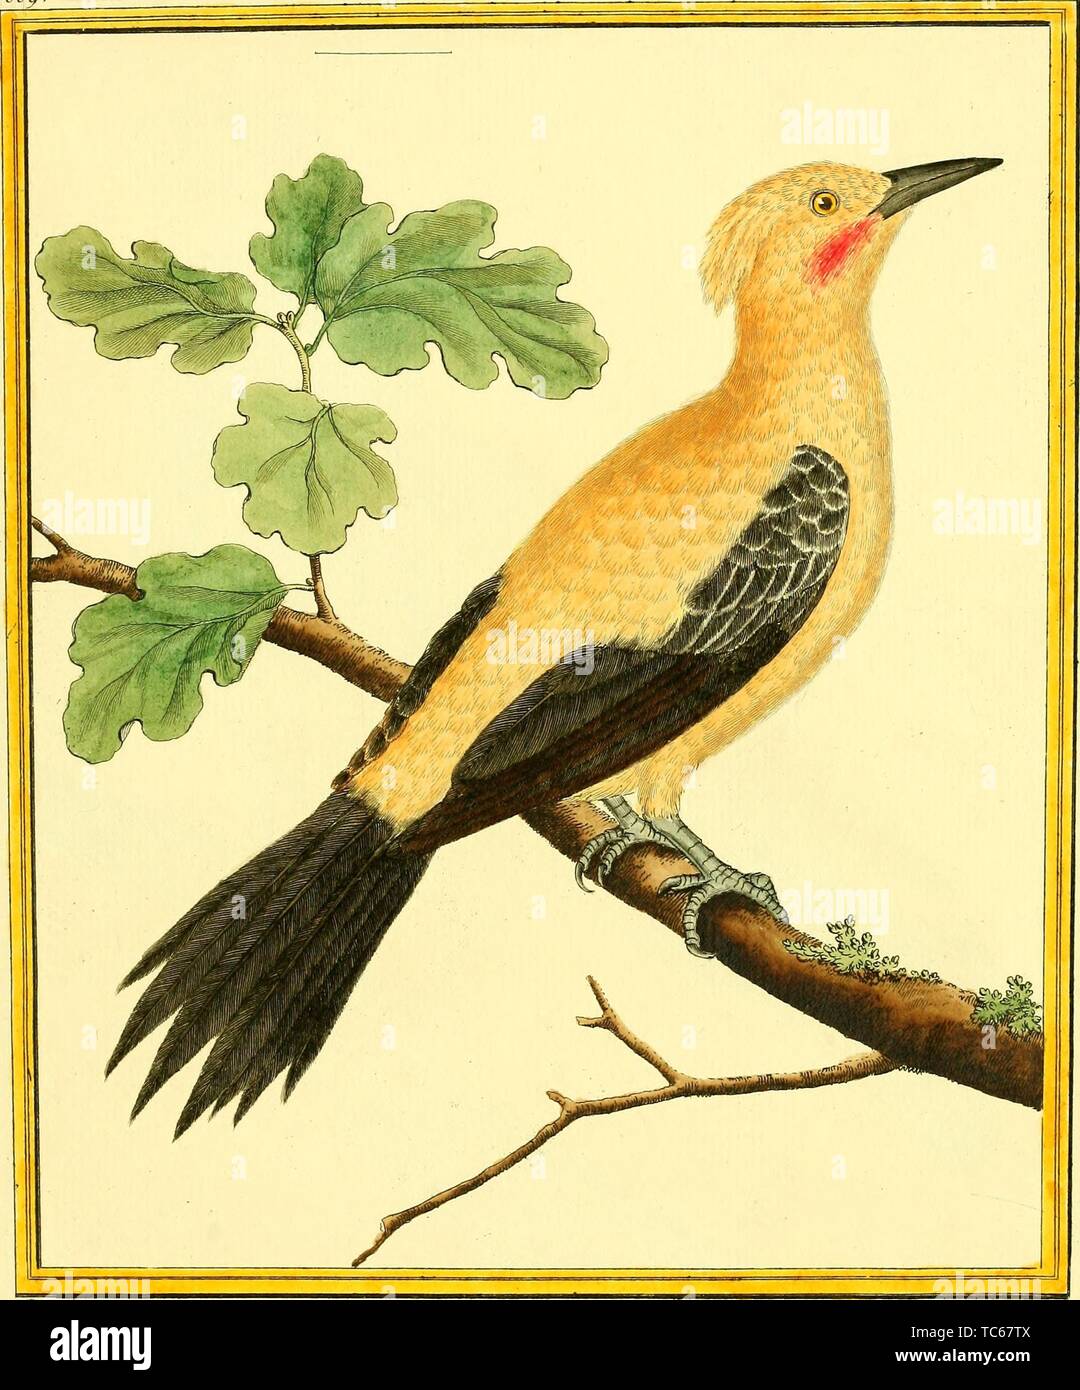 Engraved drawing of the Cream-colored Woodpecker (Celeus flavus), from the book 'Planches enluminees Dhistoire naturelle' by Francois Nicolas, Louis Jean Marie Daubenton, and Edme-Louis Daubenton, 1765. Courtesy Internet Archive. () Stock Photo